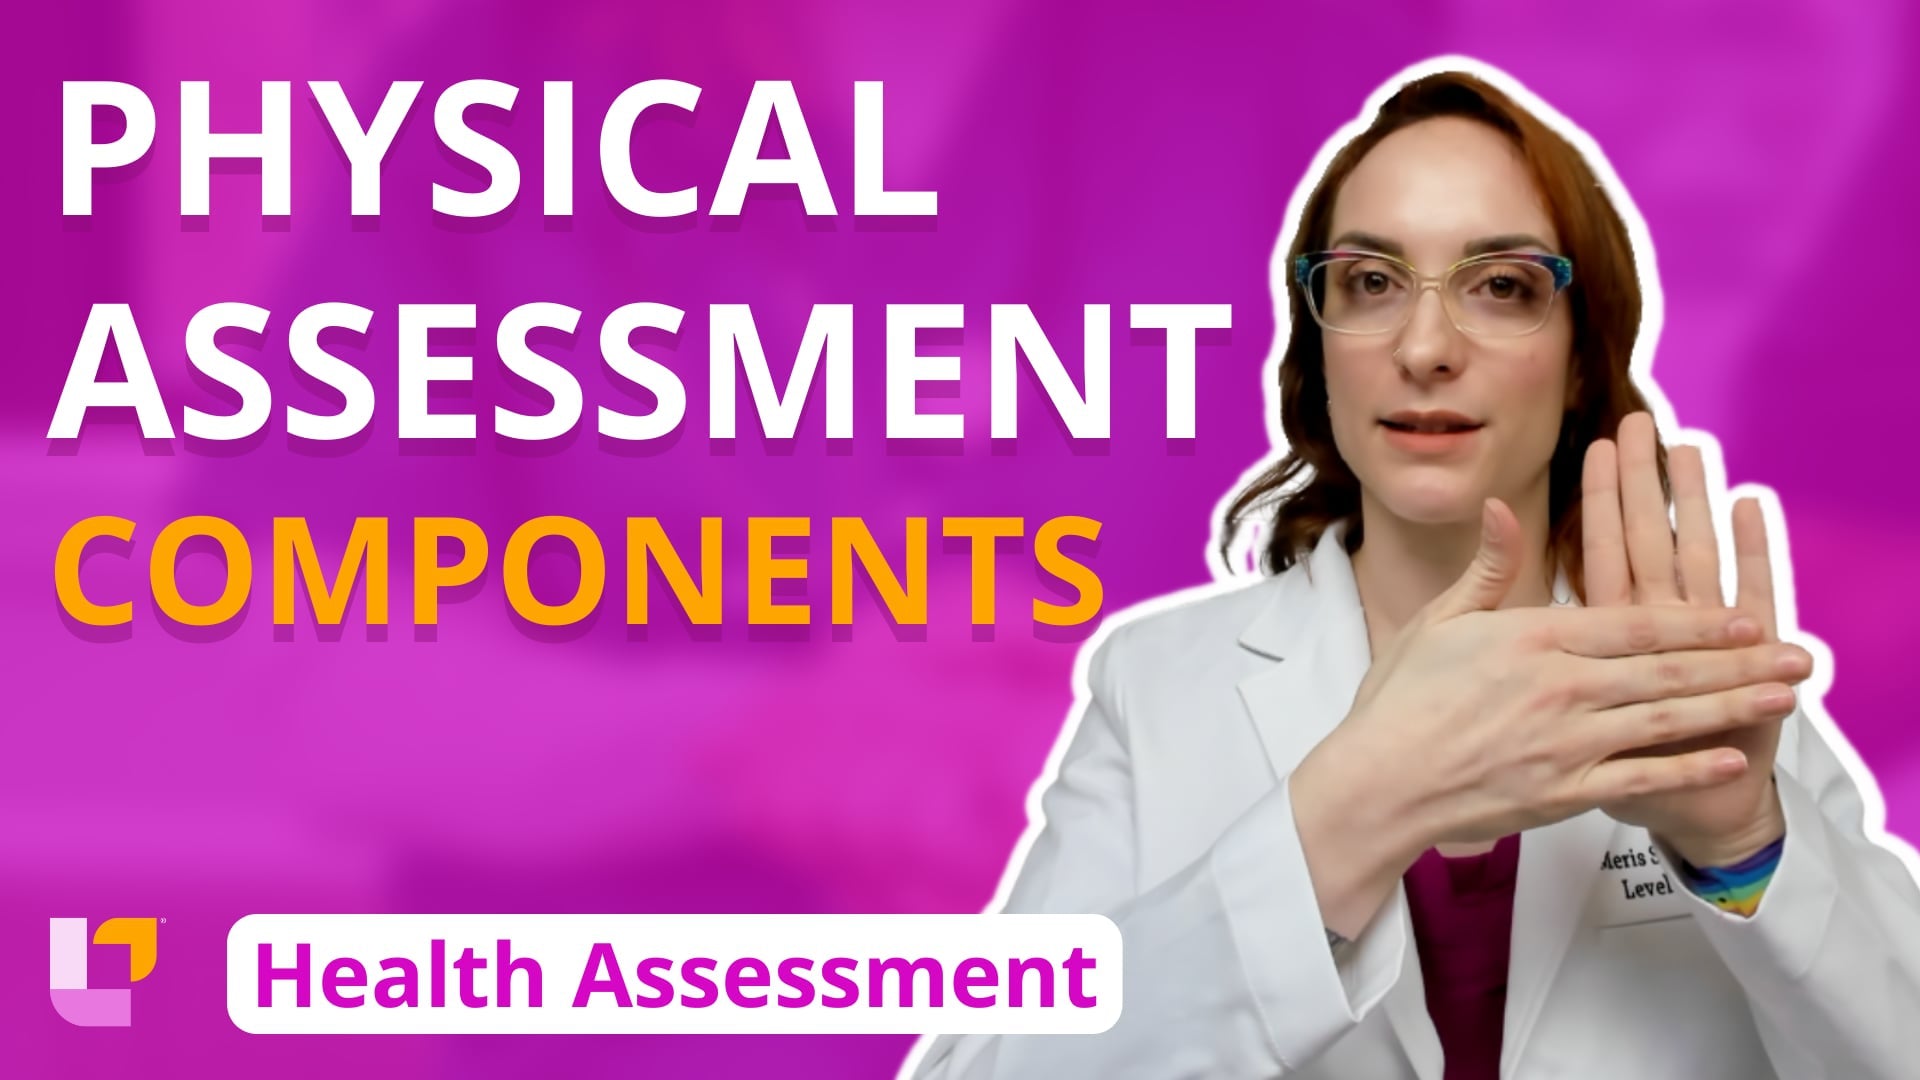 Health Assessment, part 1: Physical Assessment Components - LevelUpRN